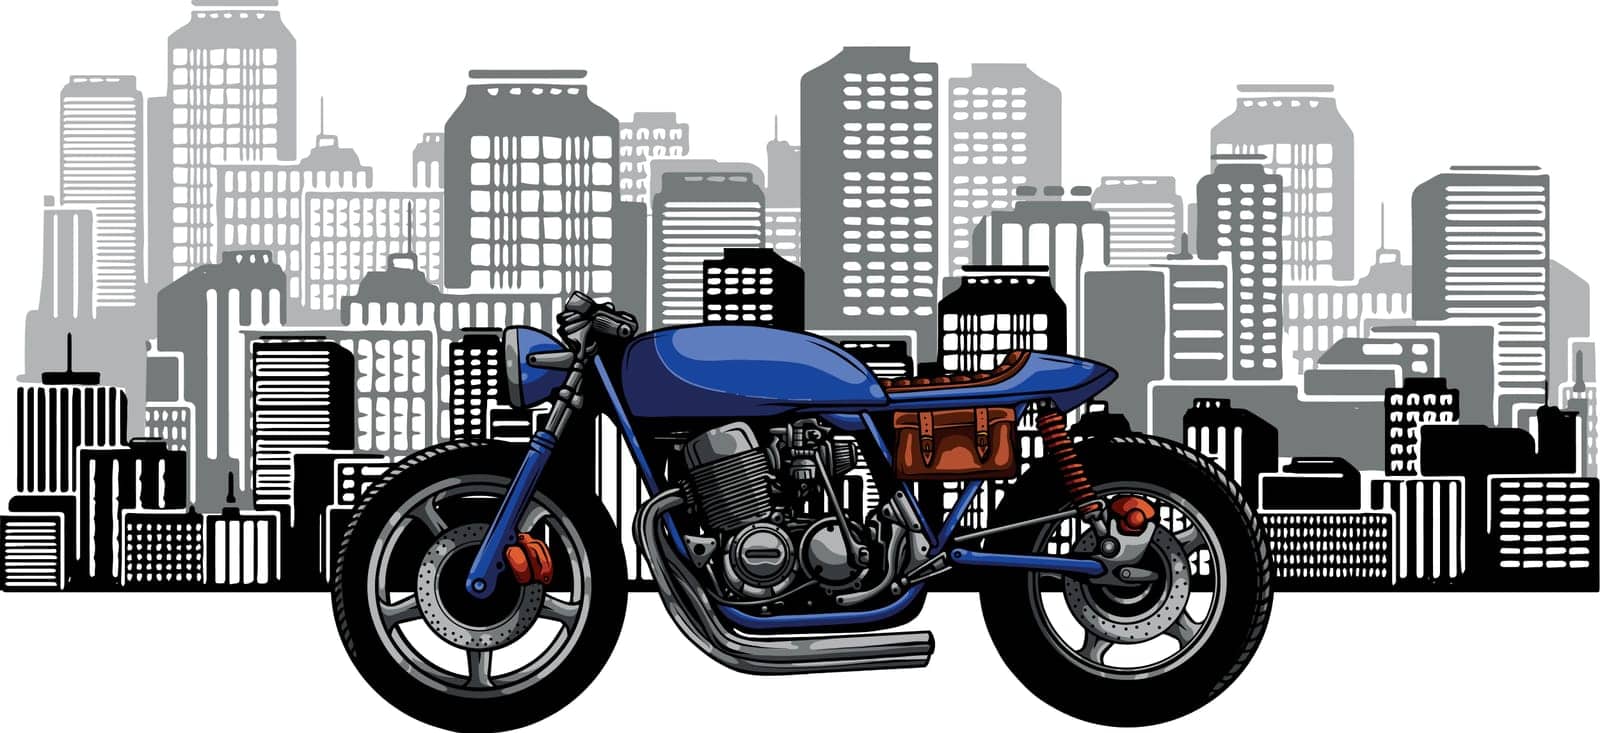 vector illustration of Colorful motorcycle on city in background by dean